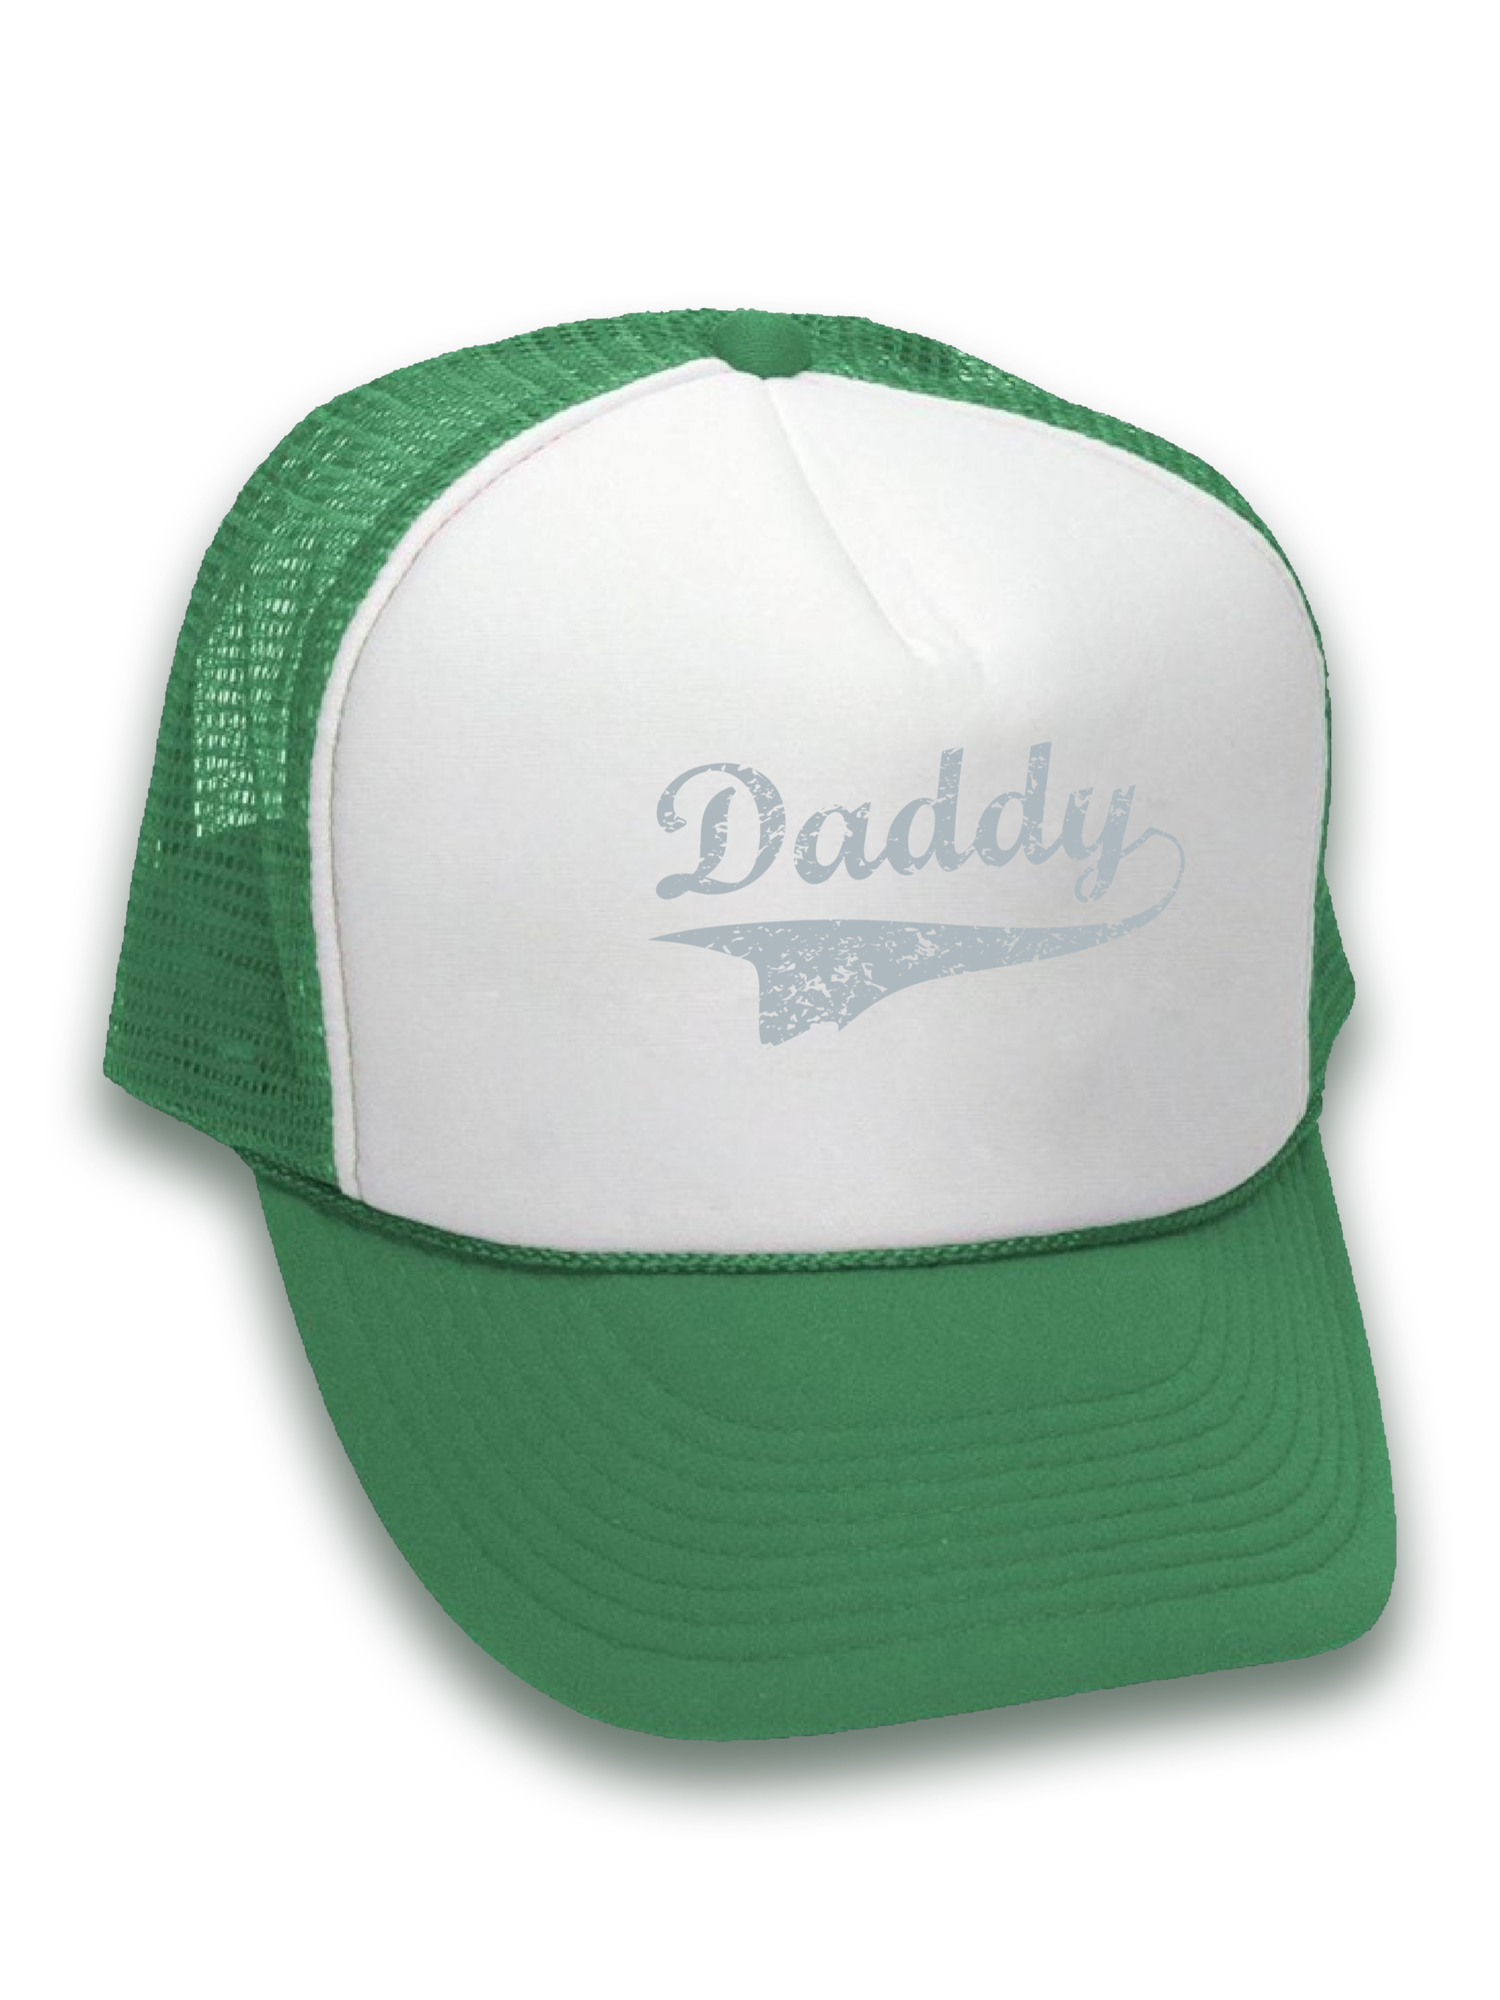 Awkward Styles Gifts for Dad Daddy Hat Father's Day Gifts for Men Dad Hats Dad 2018 Trucker Hat Funny Gifts for Dad Hat Accessories for Men Father Trucker Hat Daddy 2018 Snapback Hat Dad Hats - image 2 of 6